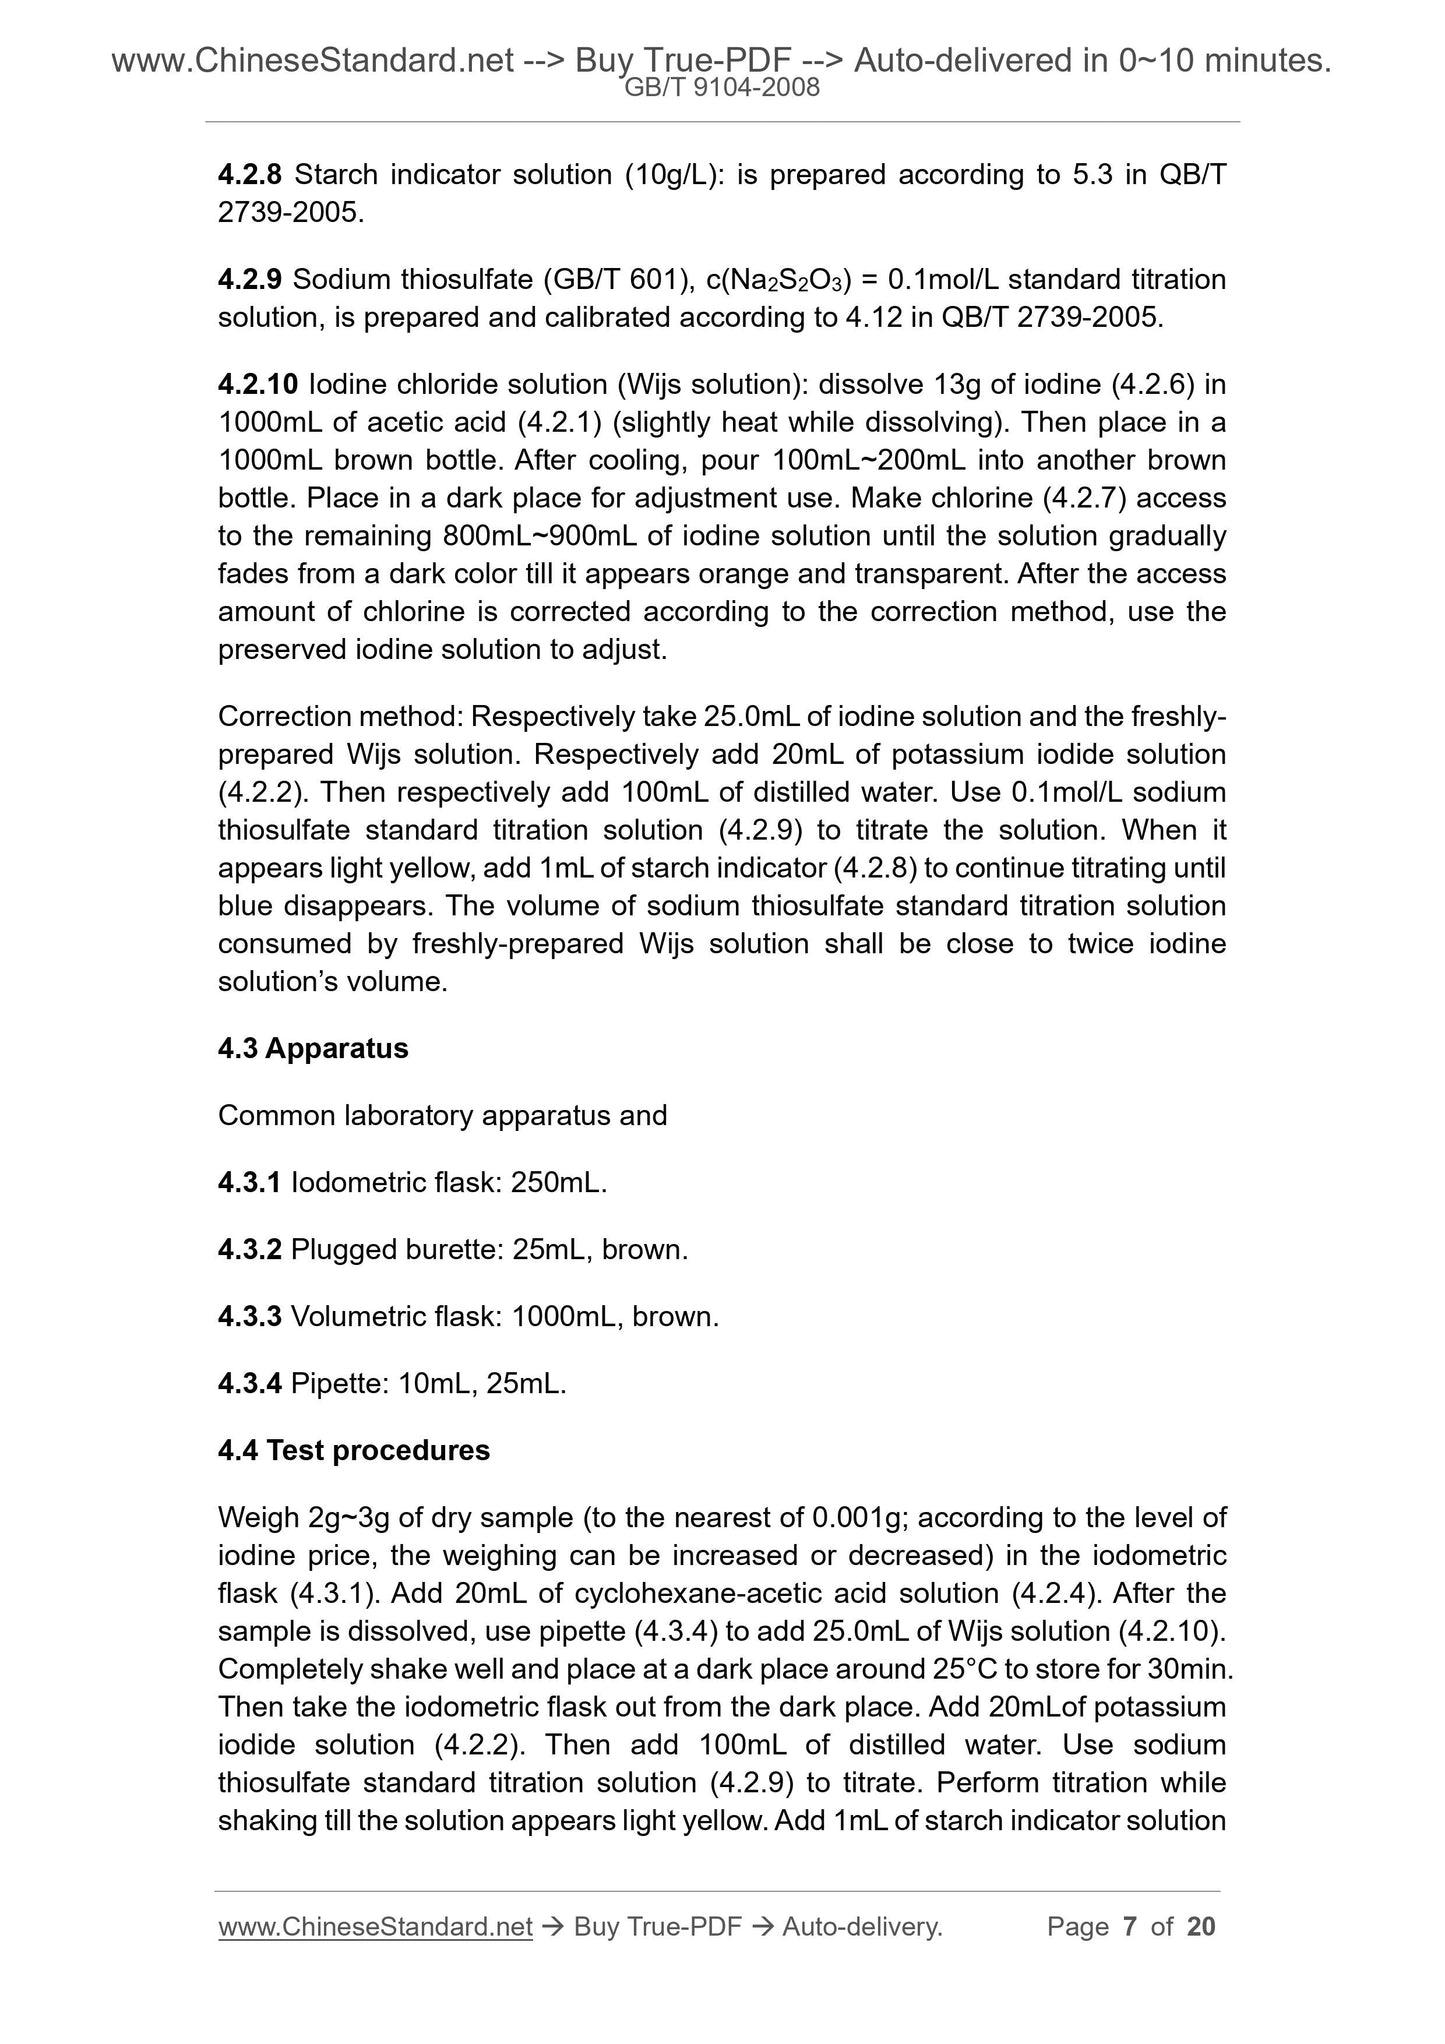 GB/T 9104-2008 Page 4